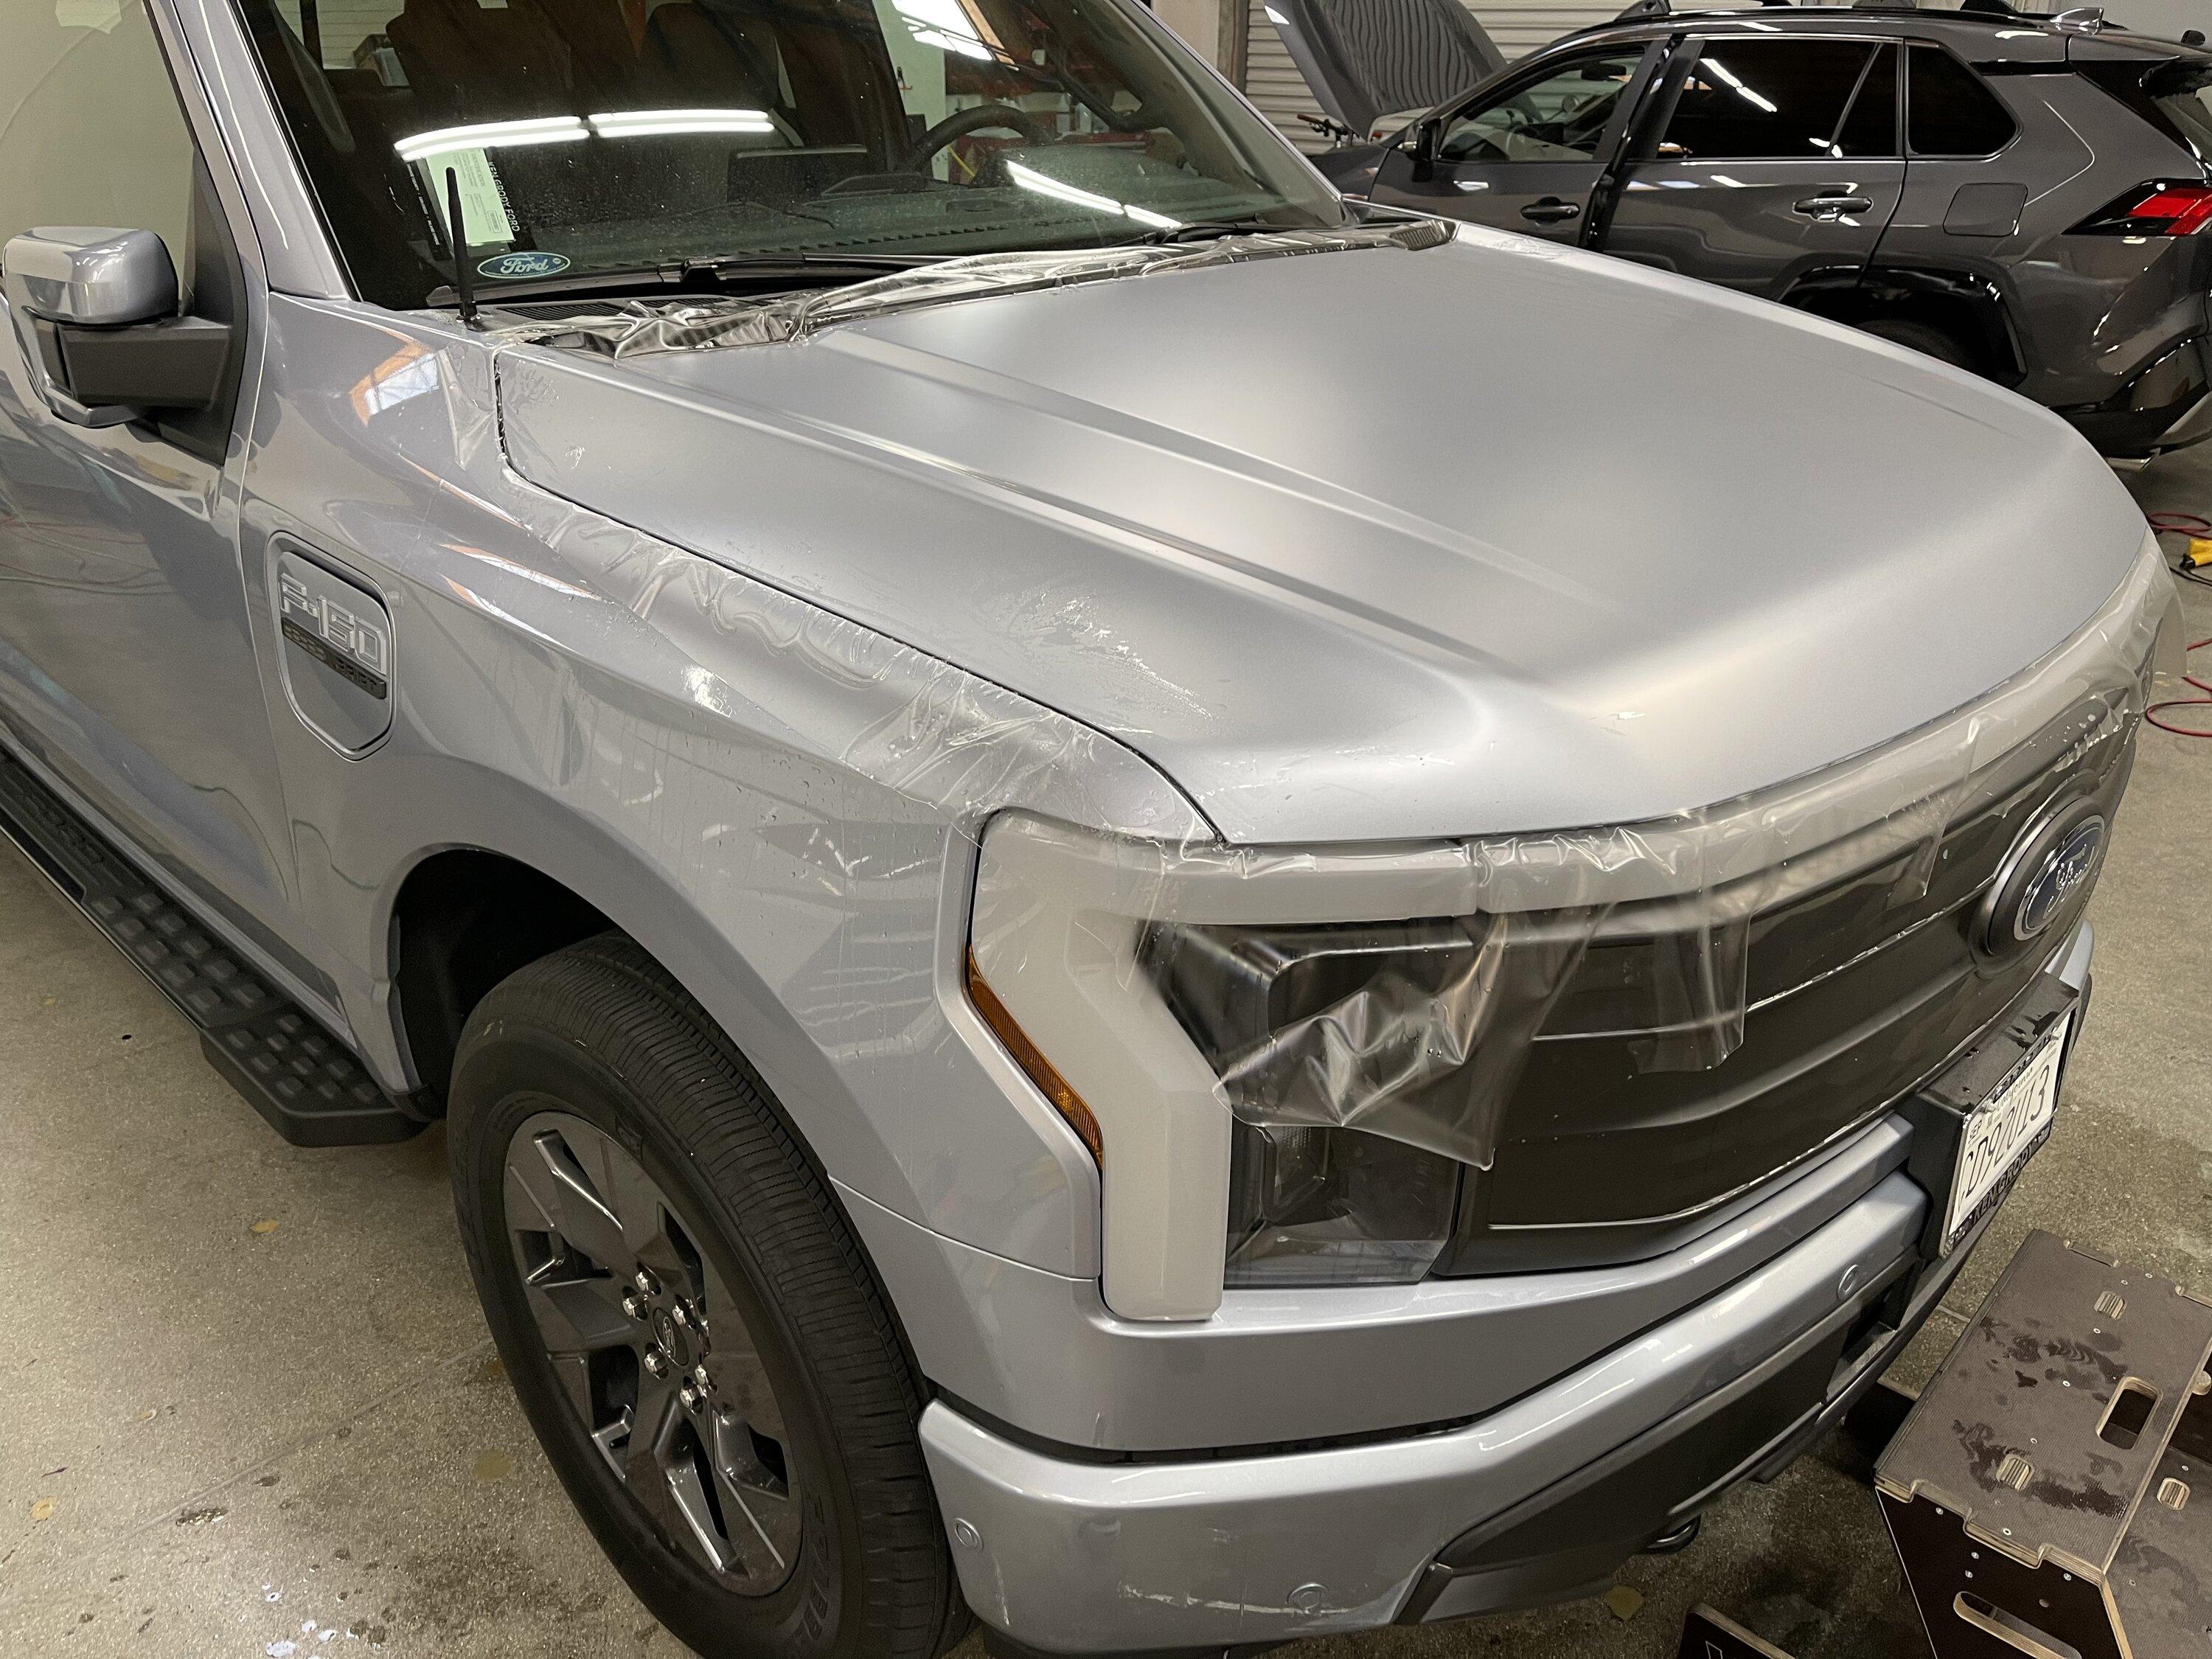 Ford F-150 Lightning Iced Blue Silver Lightning Build. Mods: PPF matte finish, Line-X, gloss black painted grille, black wrapped roof, wheels 5CAFAEBB-42A9-4293-8083-967CF4B97C21